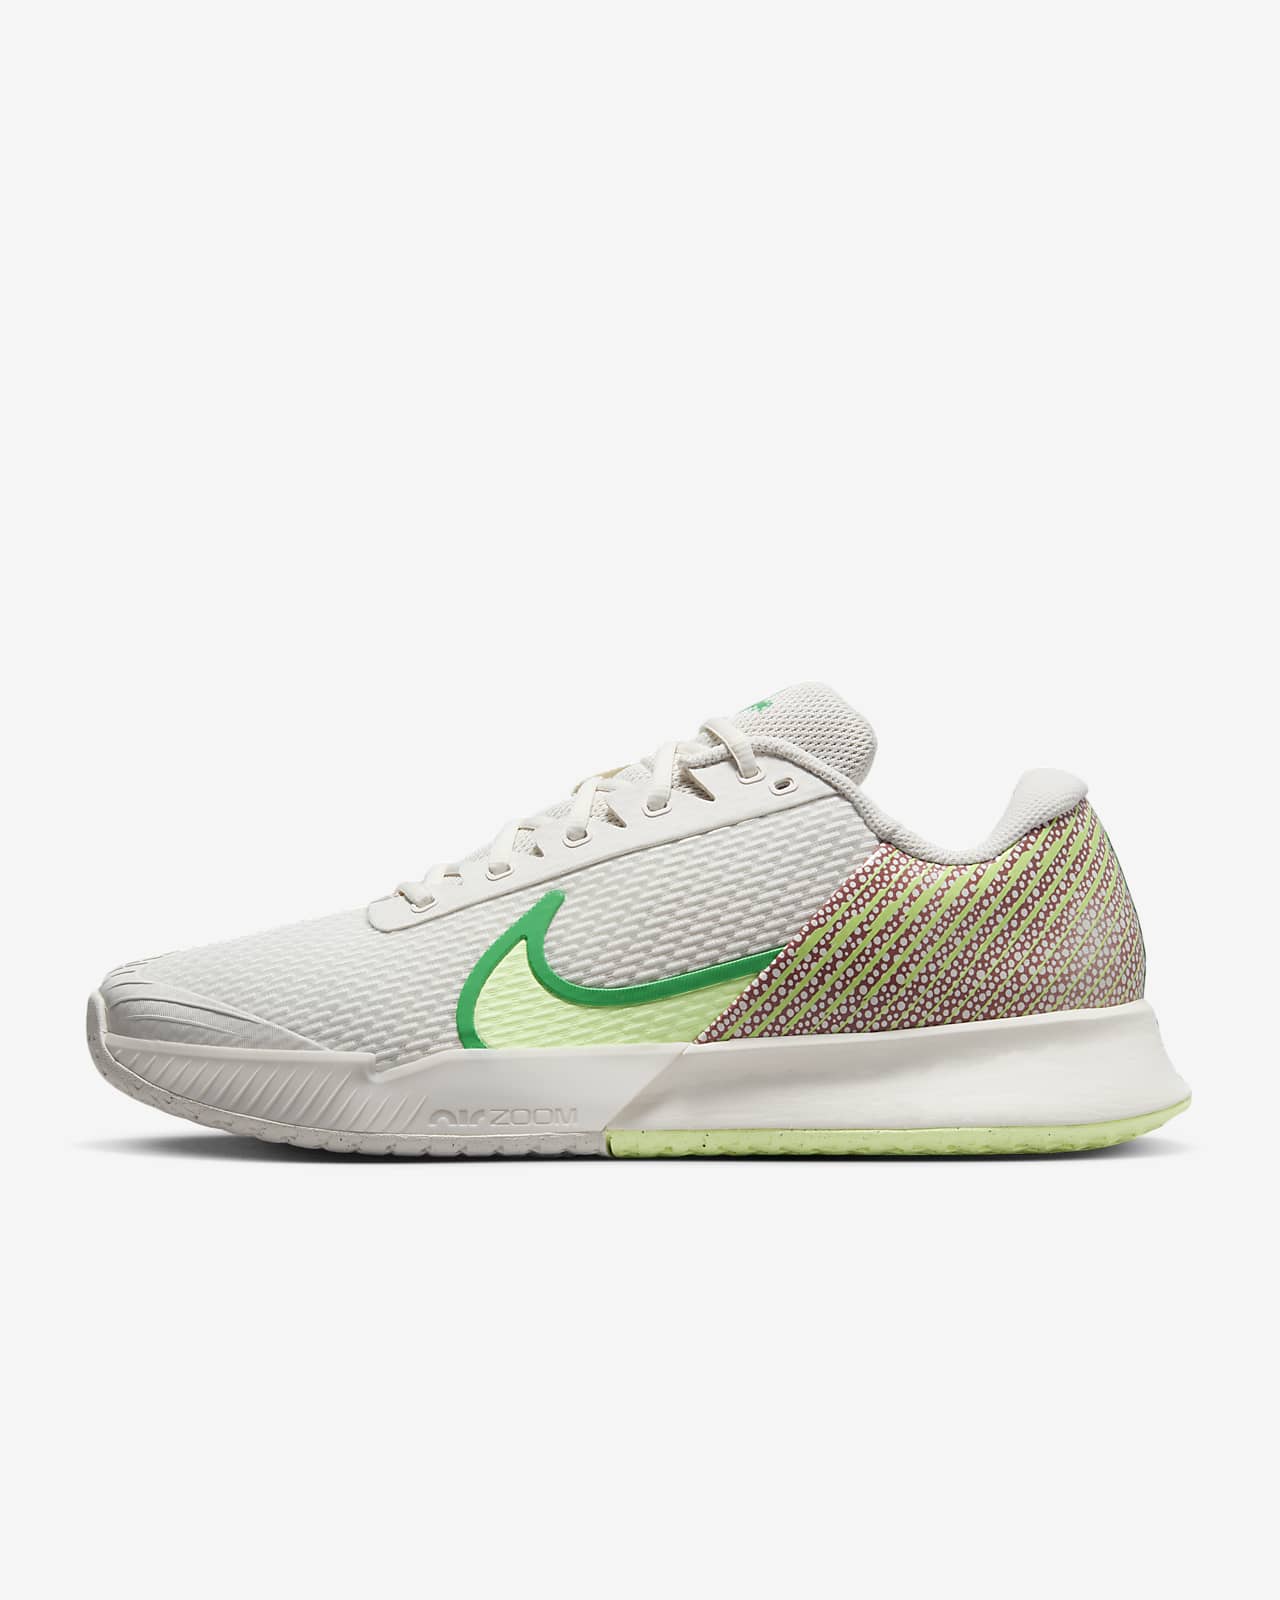 Innovative and Excellent NikeCourt Air Zoom Vapor Pro